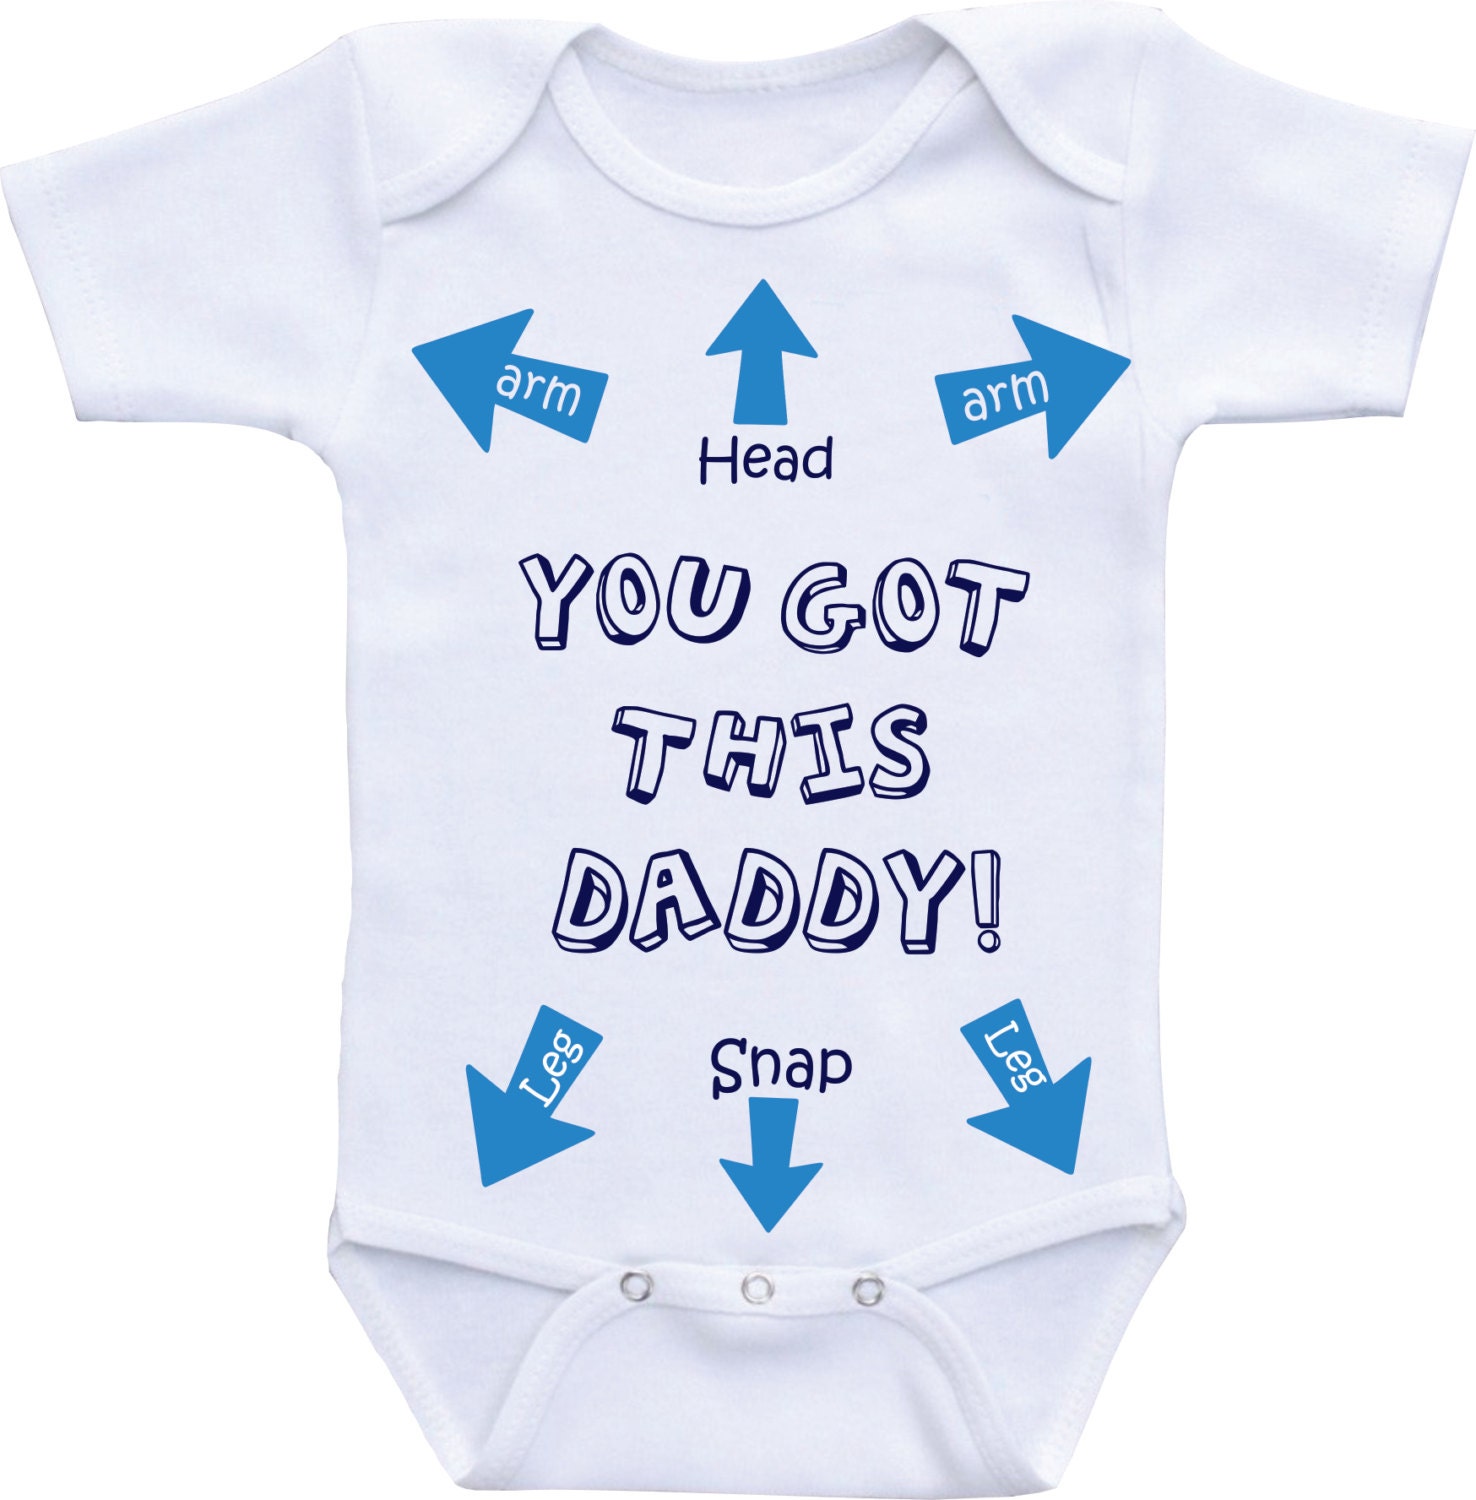 Photo for funny baby onesies about dad